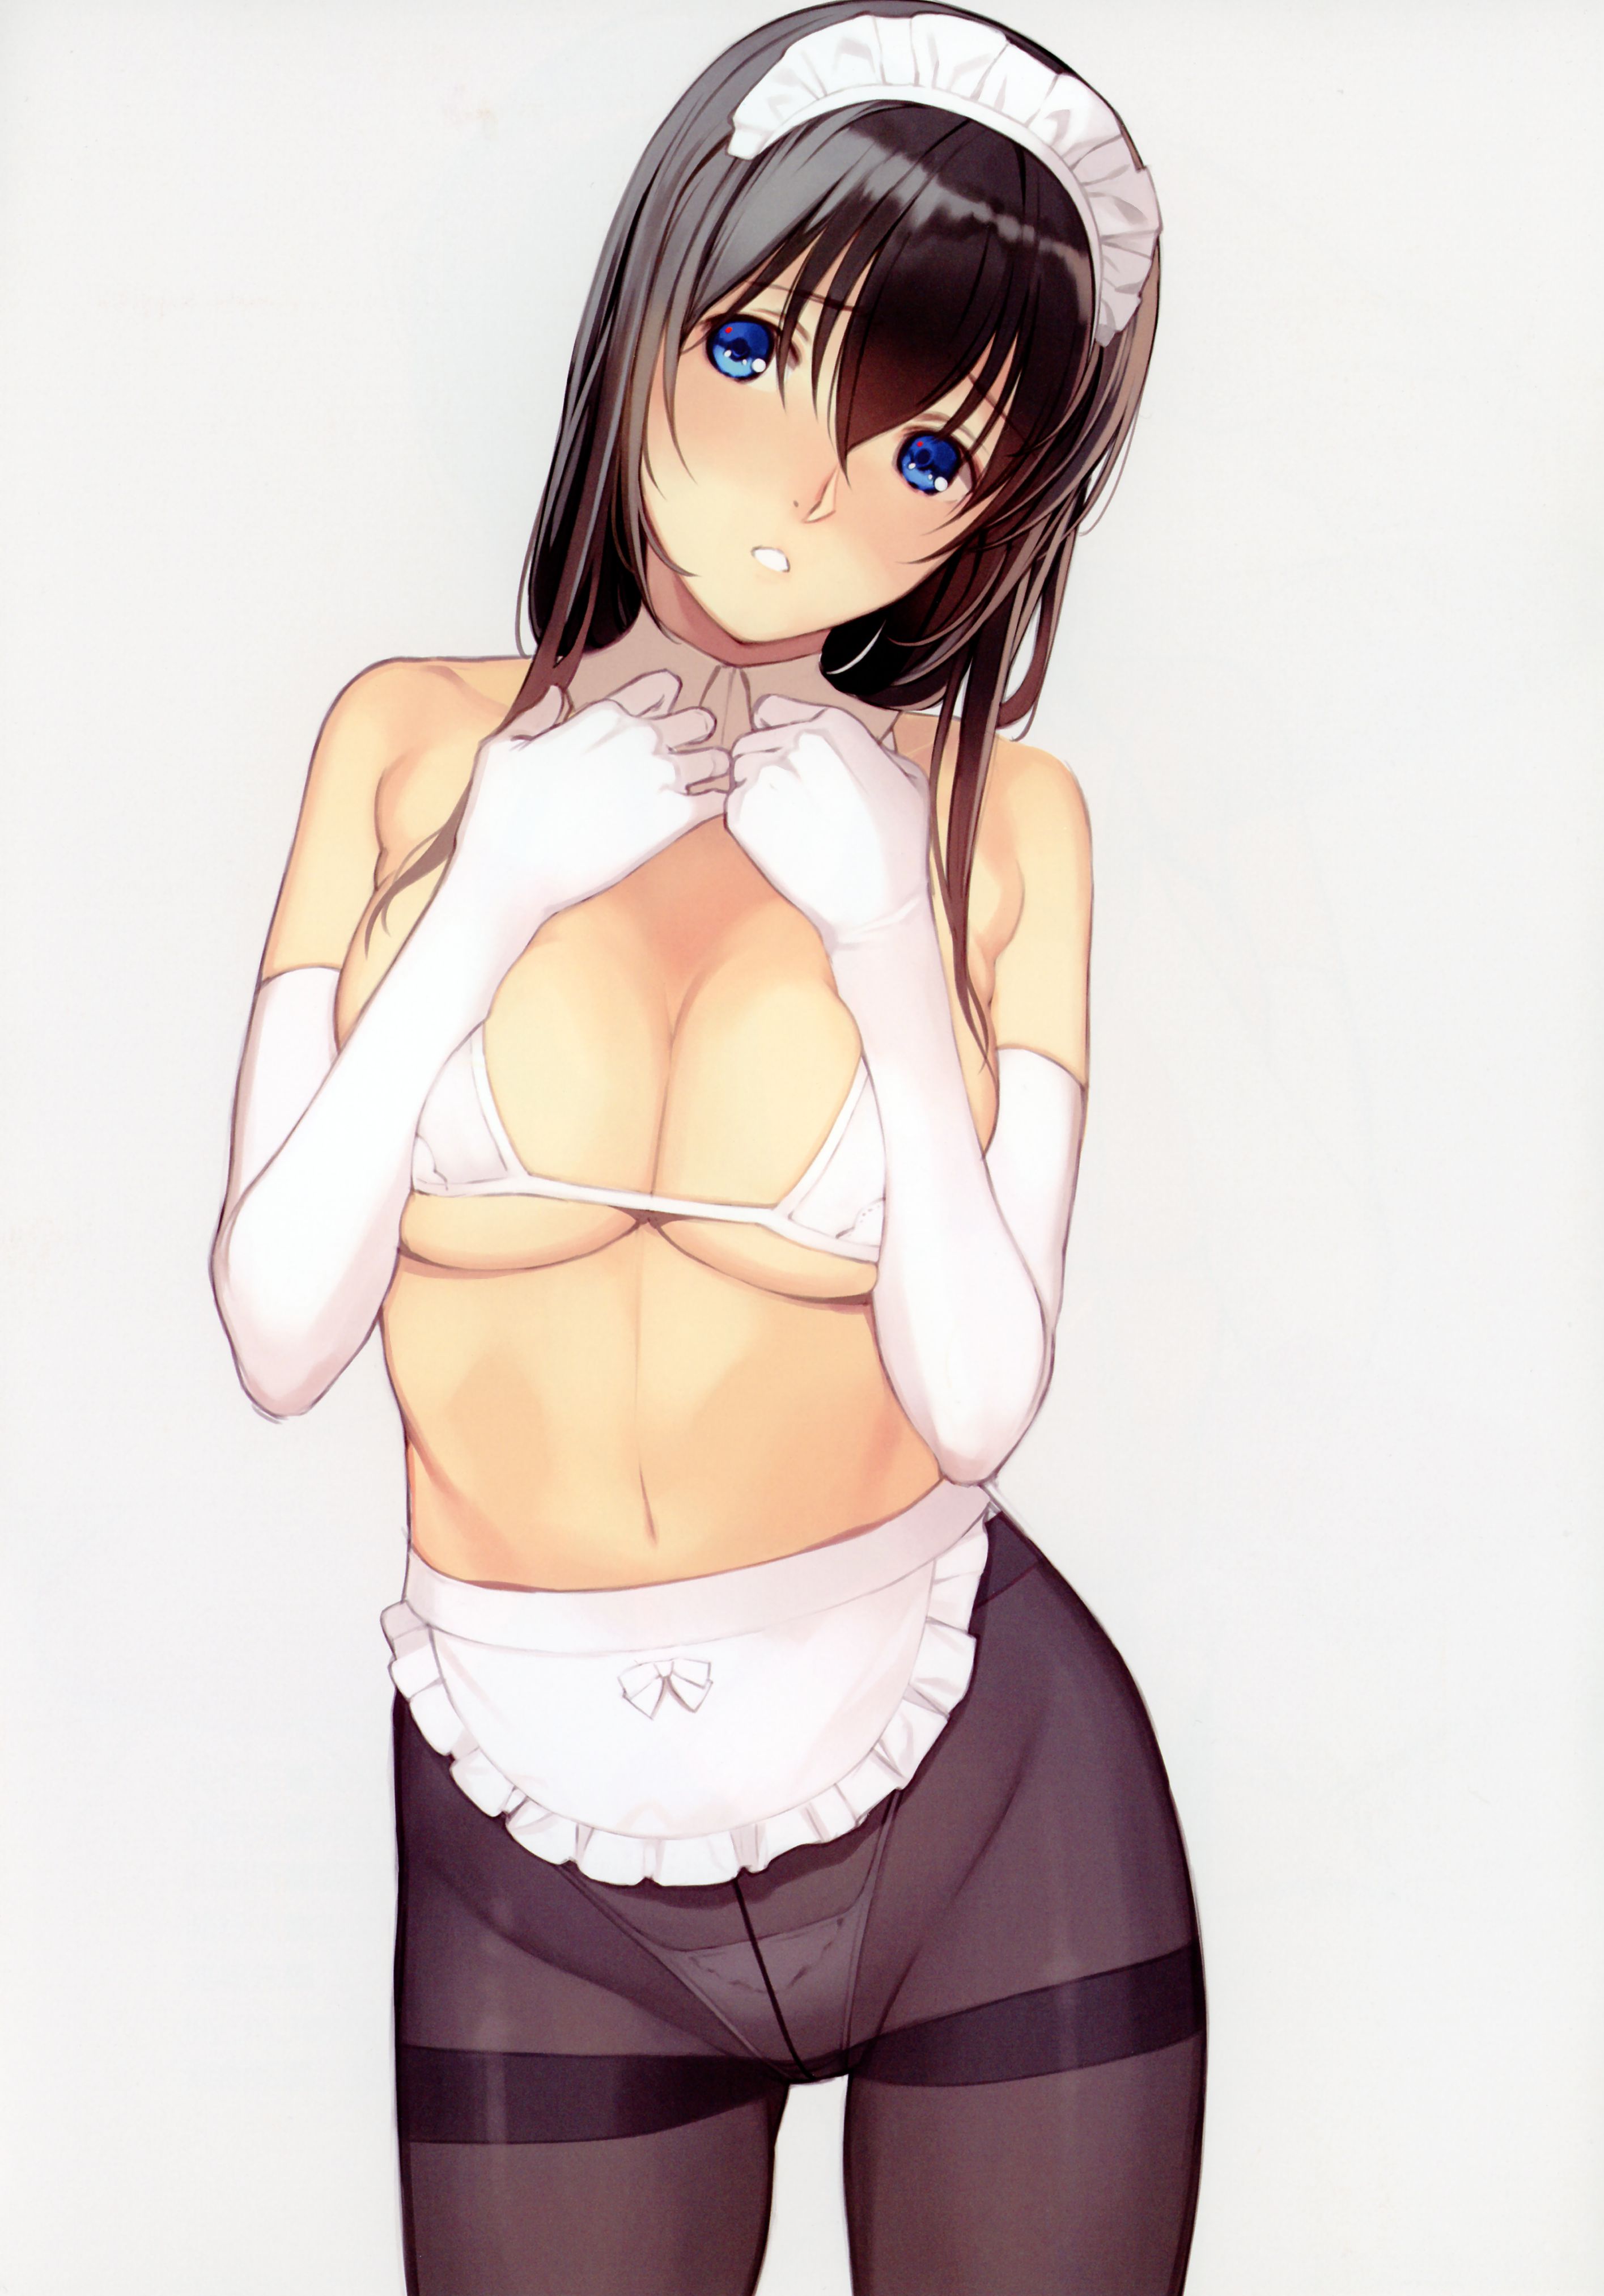 Erotic anime summary Erotic image collection of the valley that seems to smell good [50 sheets] 47